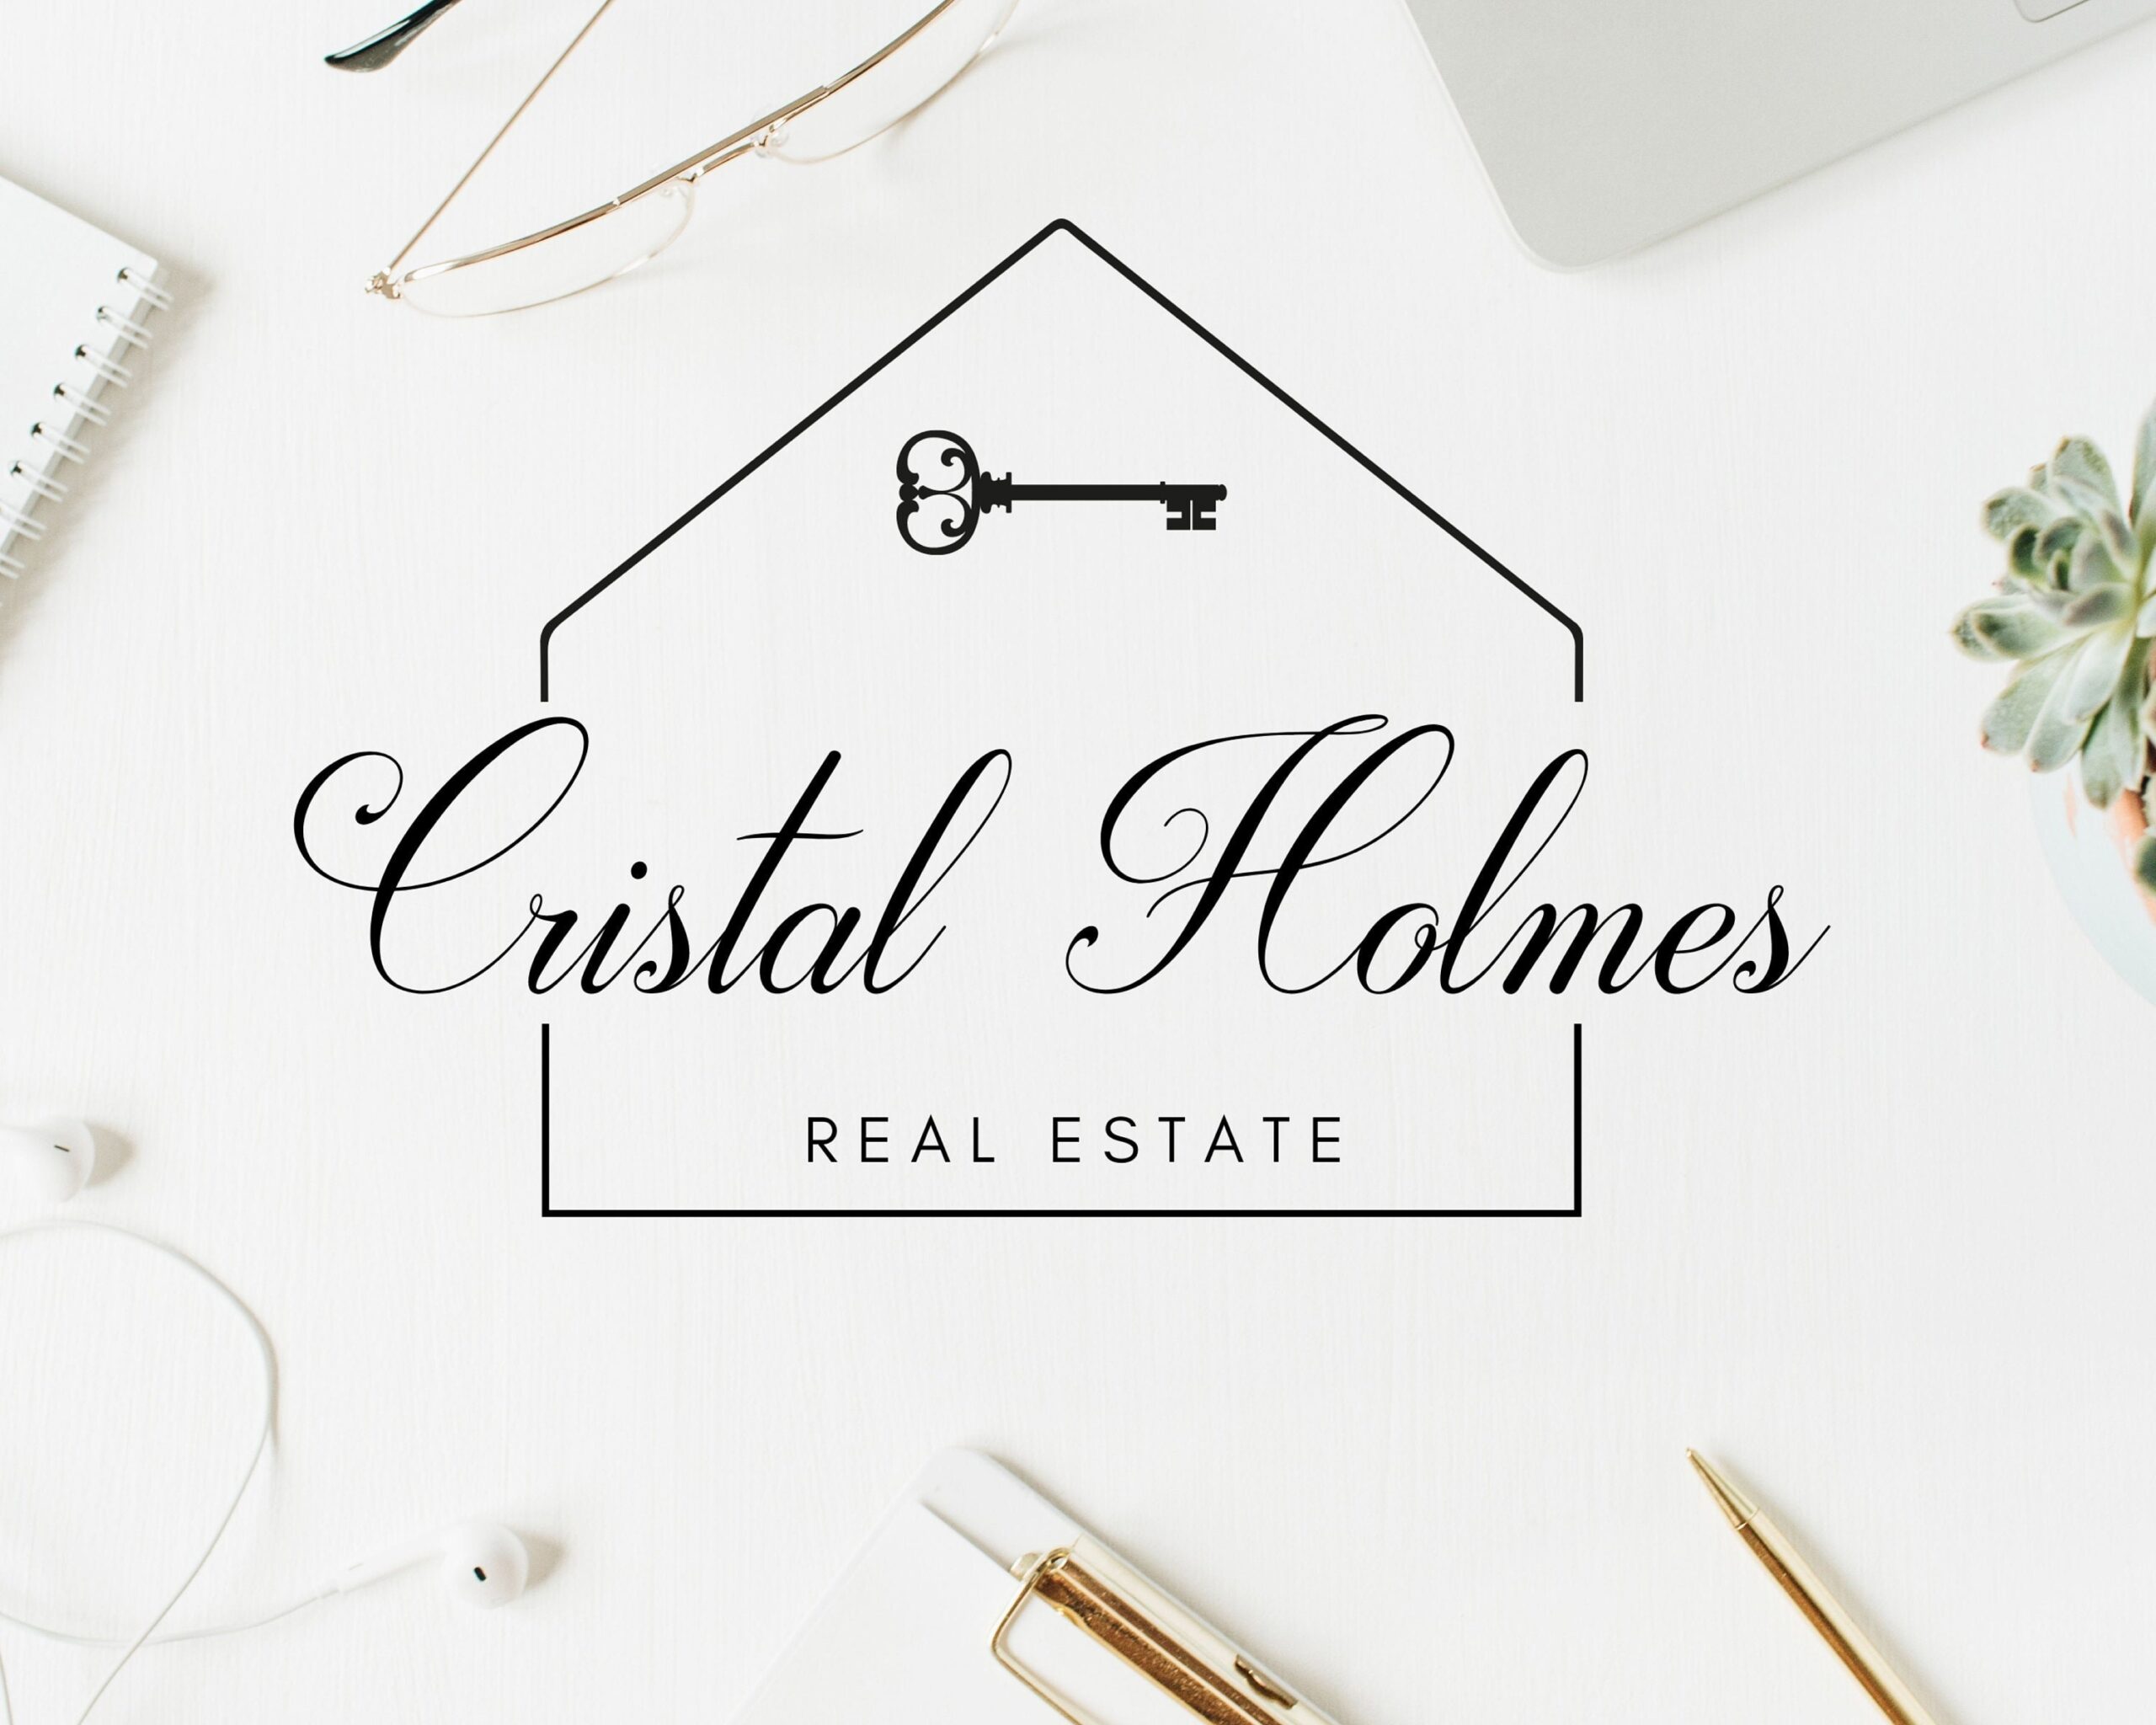 Premade Logo for Real Estate Agents - ALL DESIGNS INCLUDED: Gold Realtor? Logos -  Submarks and Watermarks - High-Quality Print-Ready and Web